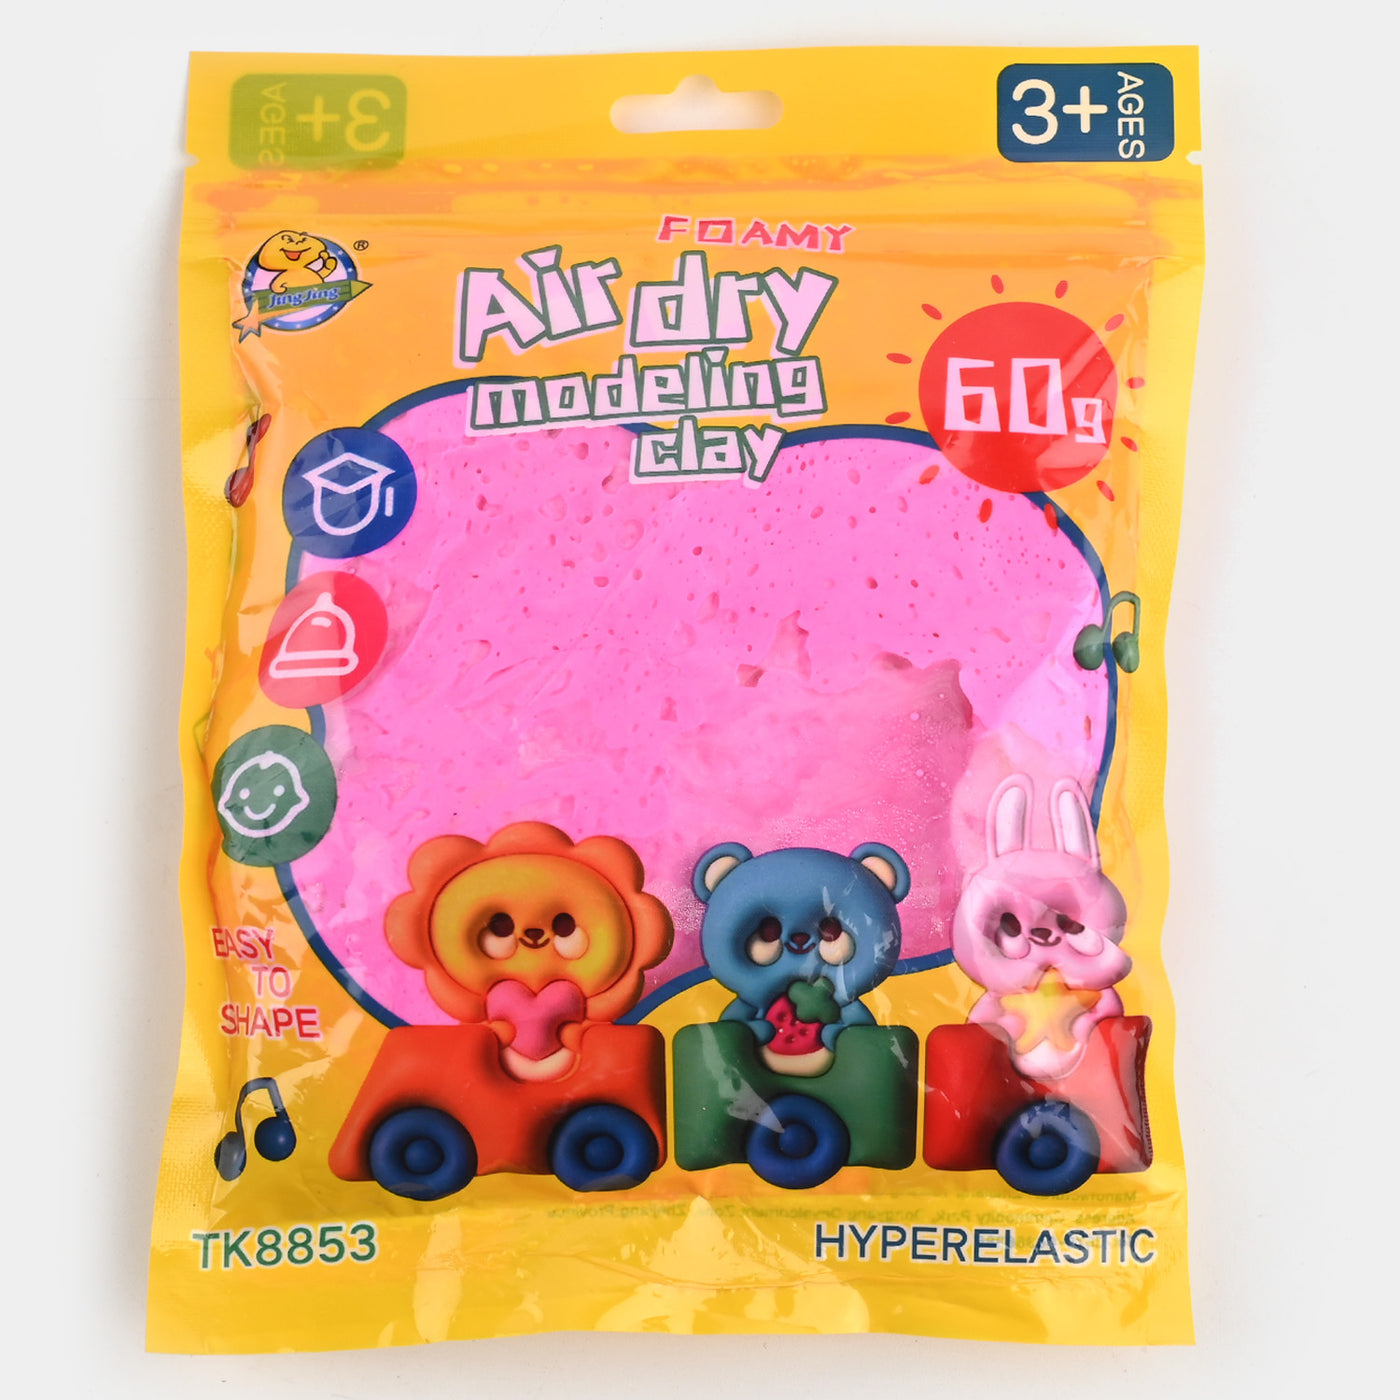 Air Dry Modeling Clay | 60G